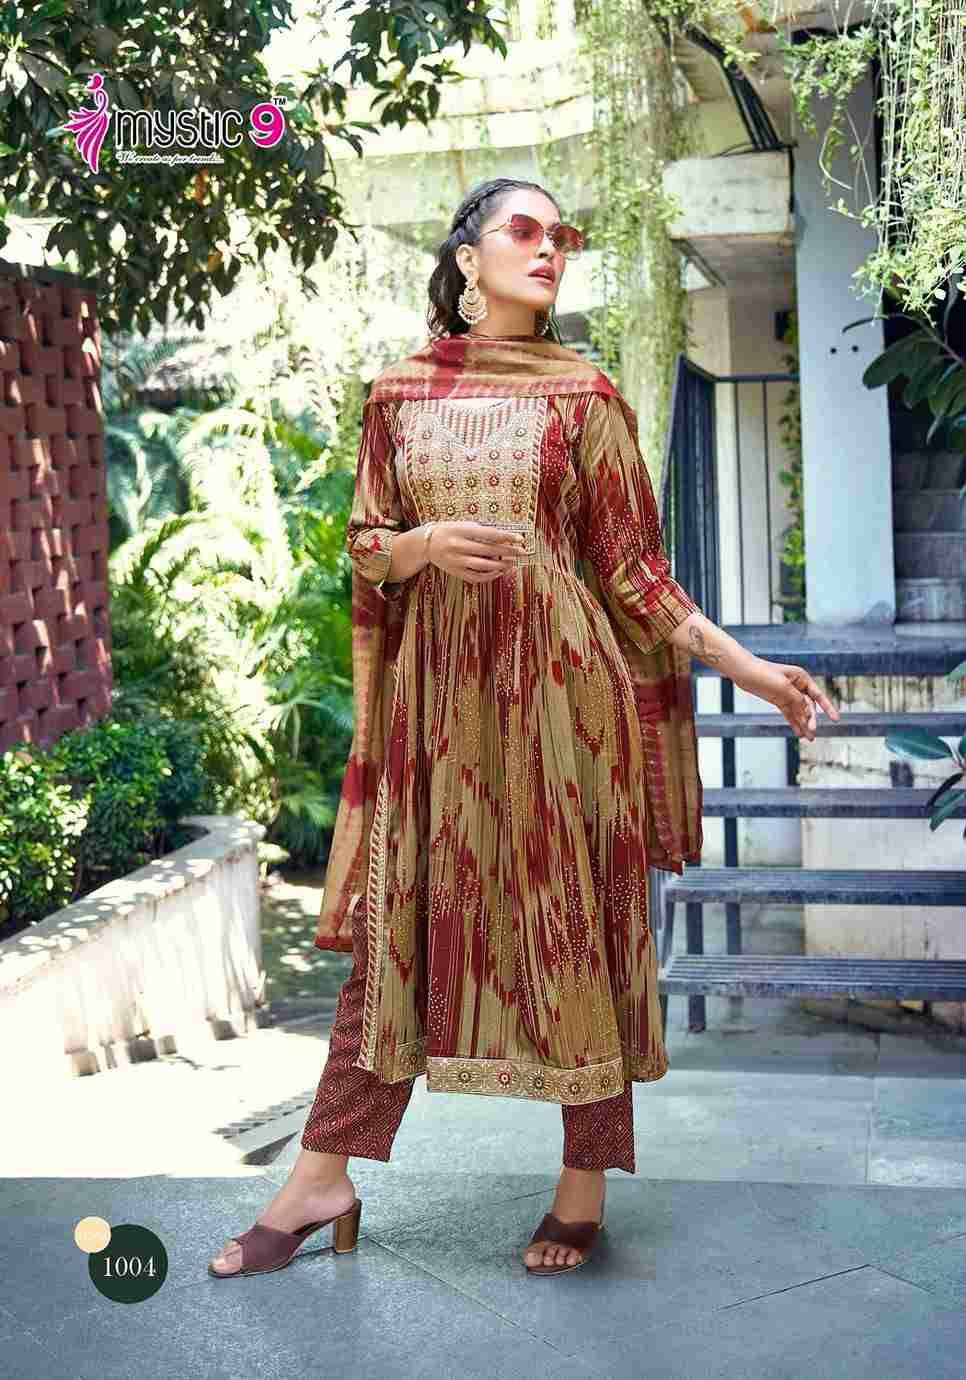 Black Beauty By Mystic 9 1001 To 1008 Series Beautiful Suits Colorful Stylish Fancy Casual Wear & Ethnic Wear Rayon Foil Print Dresses At Wholesale Price